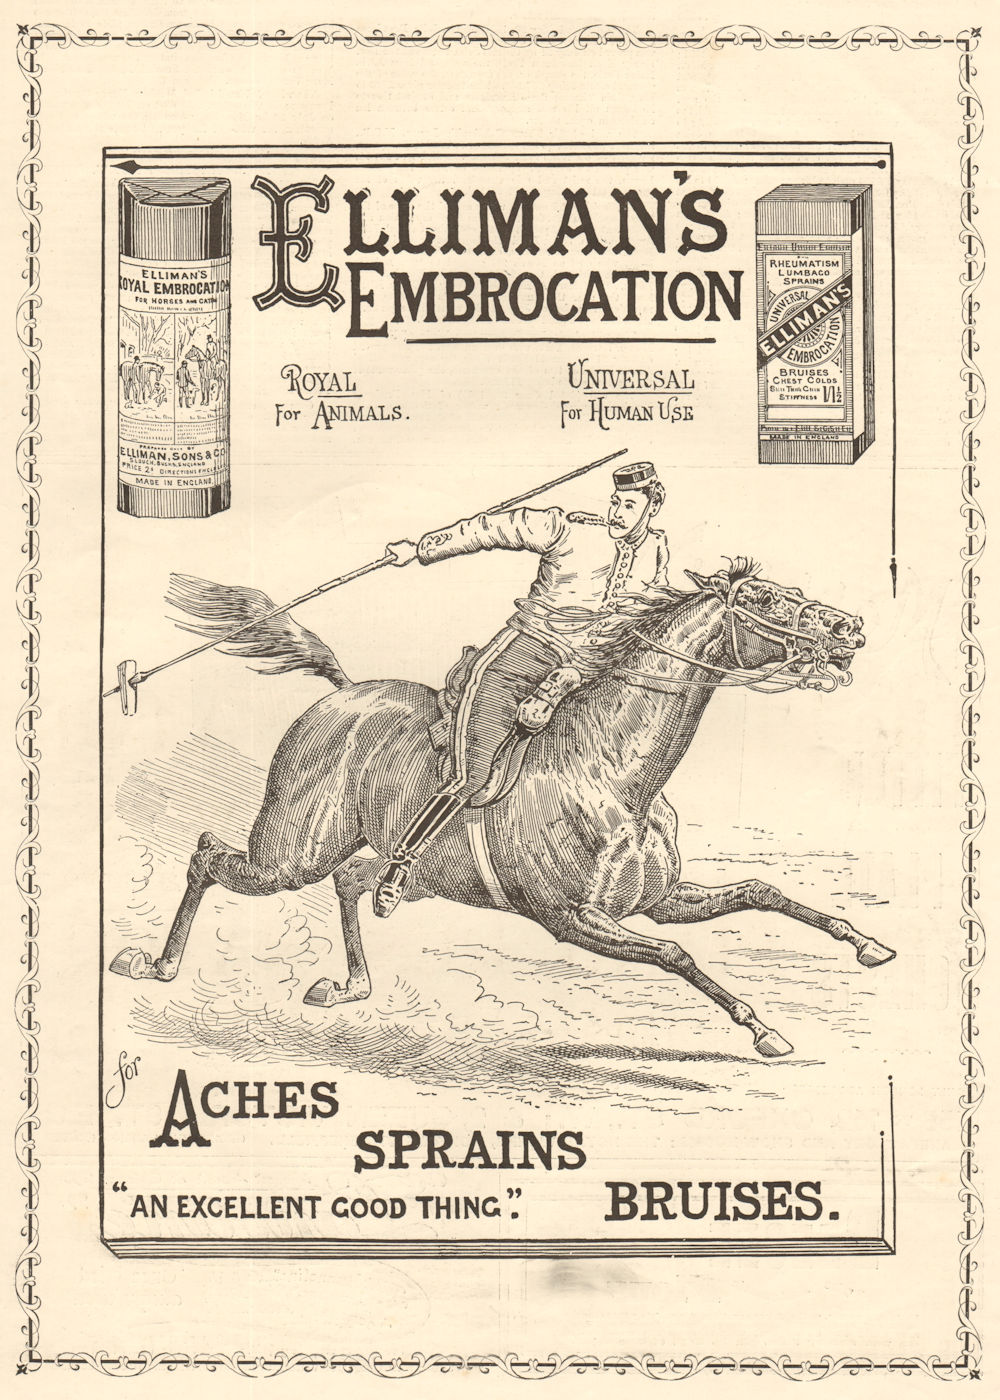 Associate Product Elliman's embrocation. ADVERT. Militaria 1896 antique ILN full page print